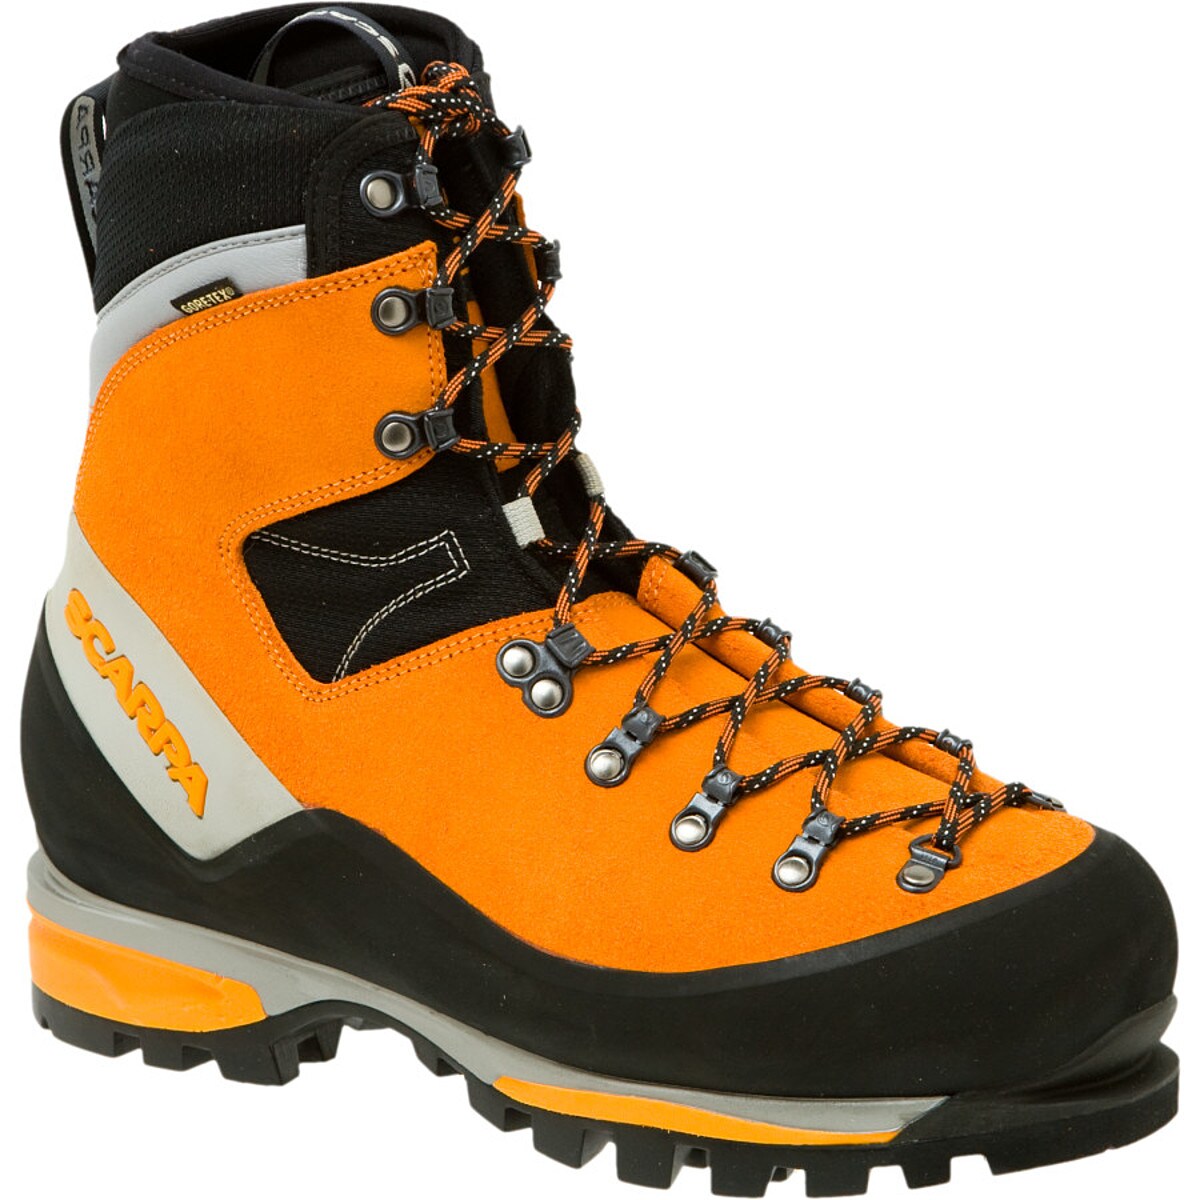 Mountaineering Boot Reviews - Trailspace.com